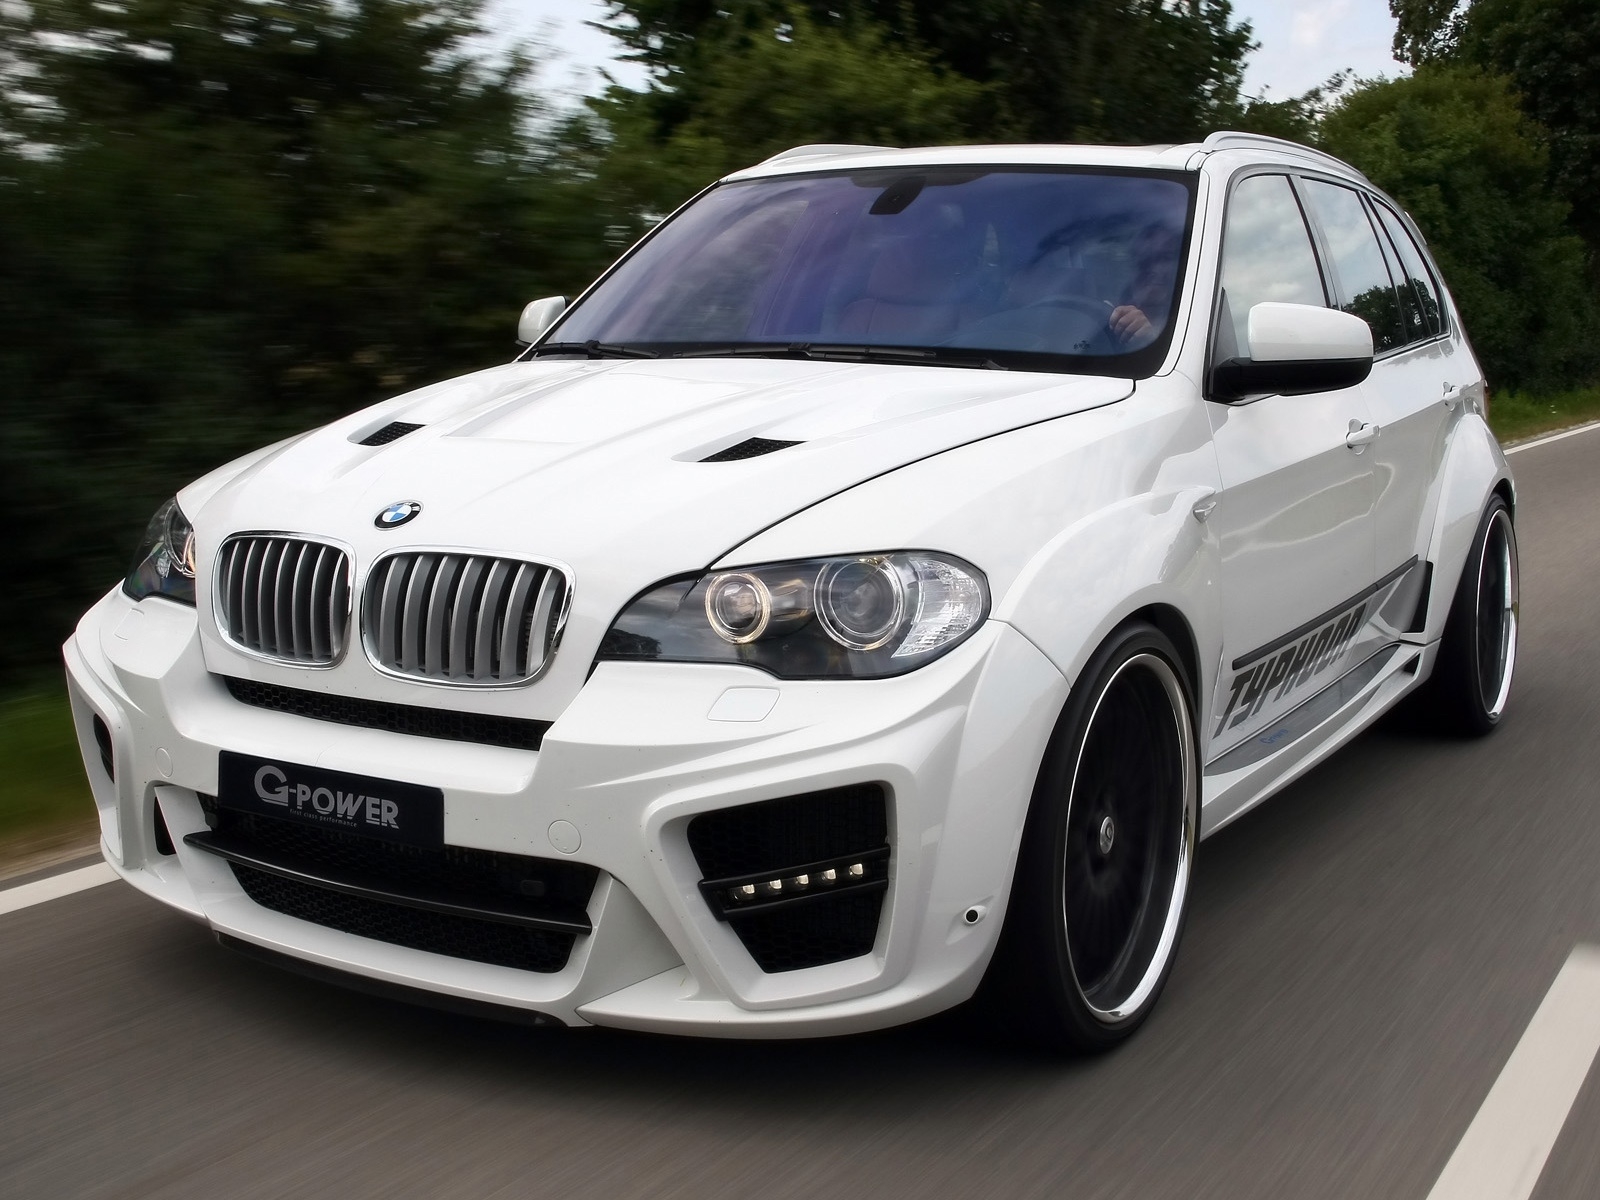 BMW X5 Typhoon RS 2010 G Power for 1600 x 1200 resolution